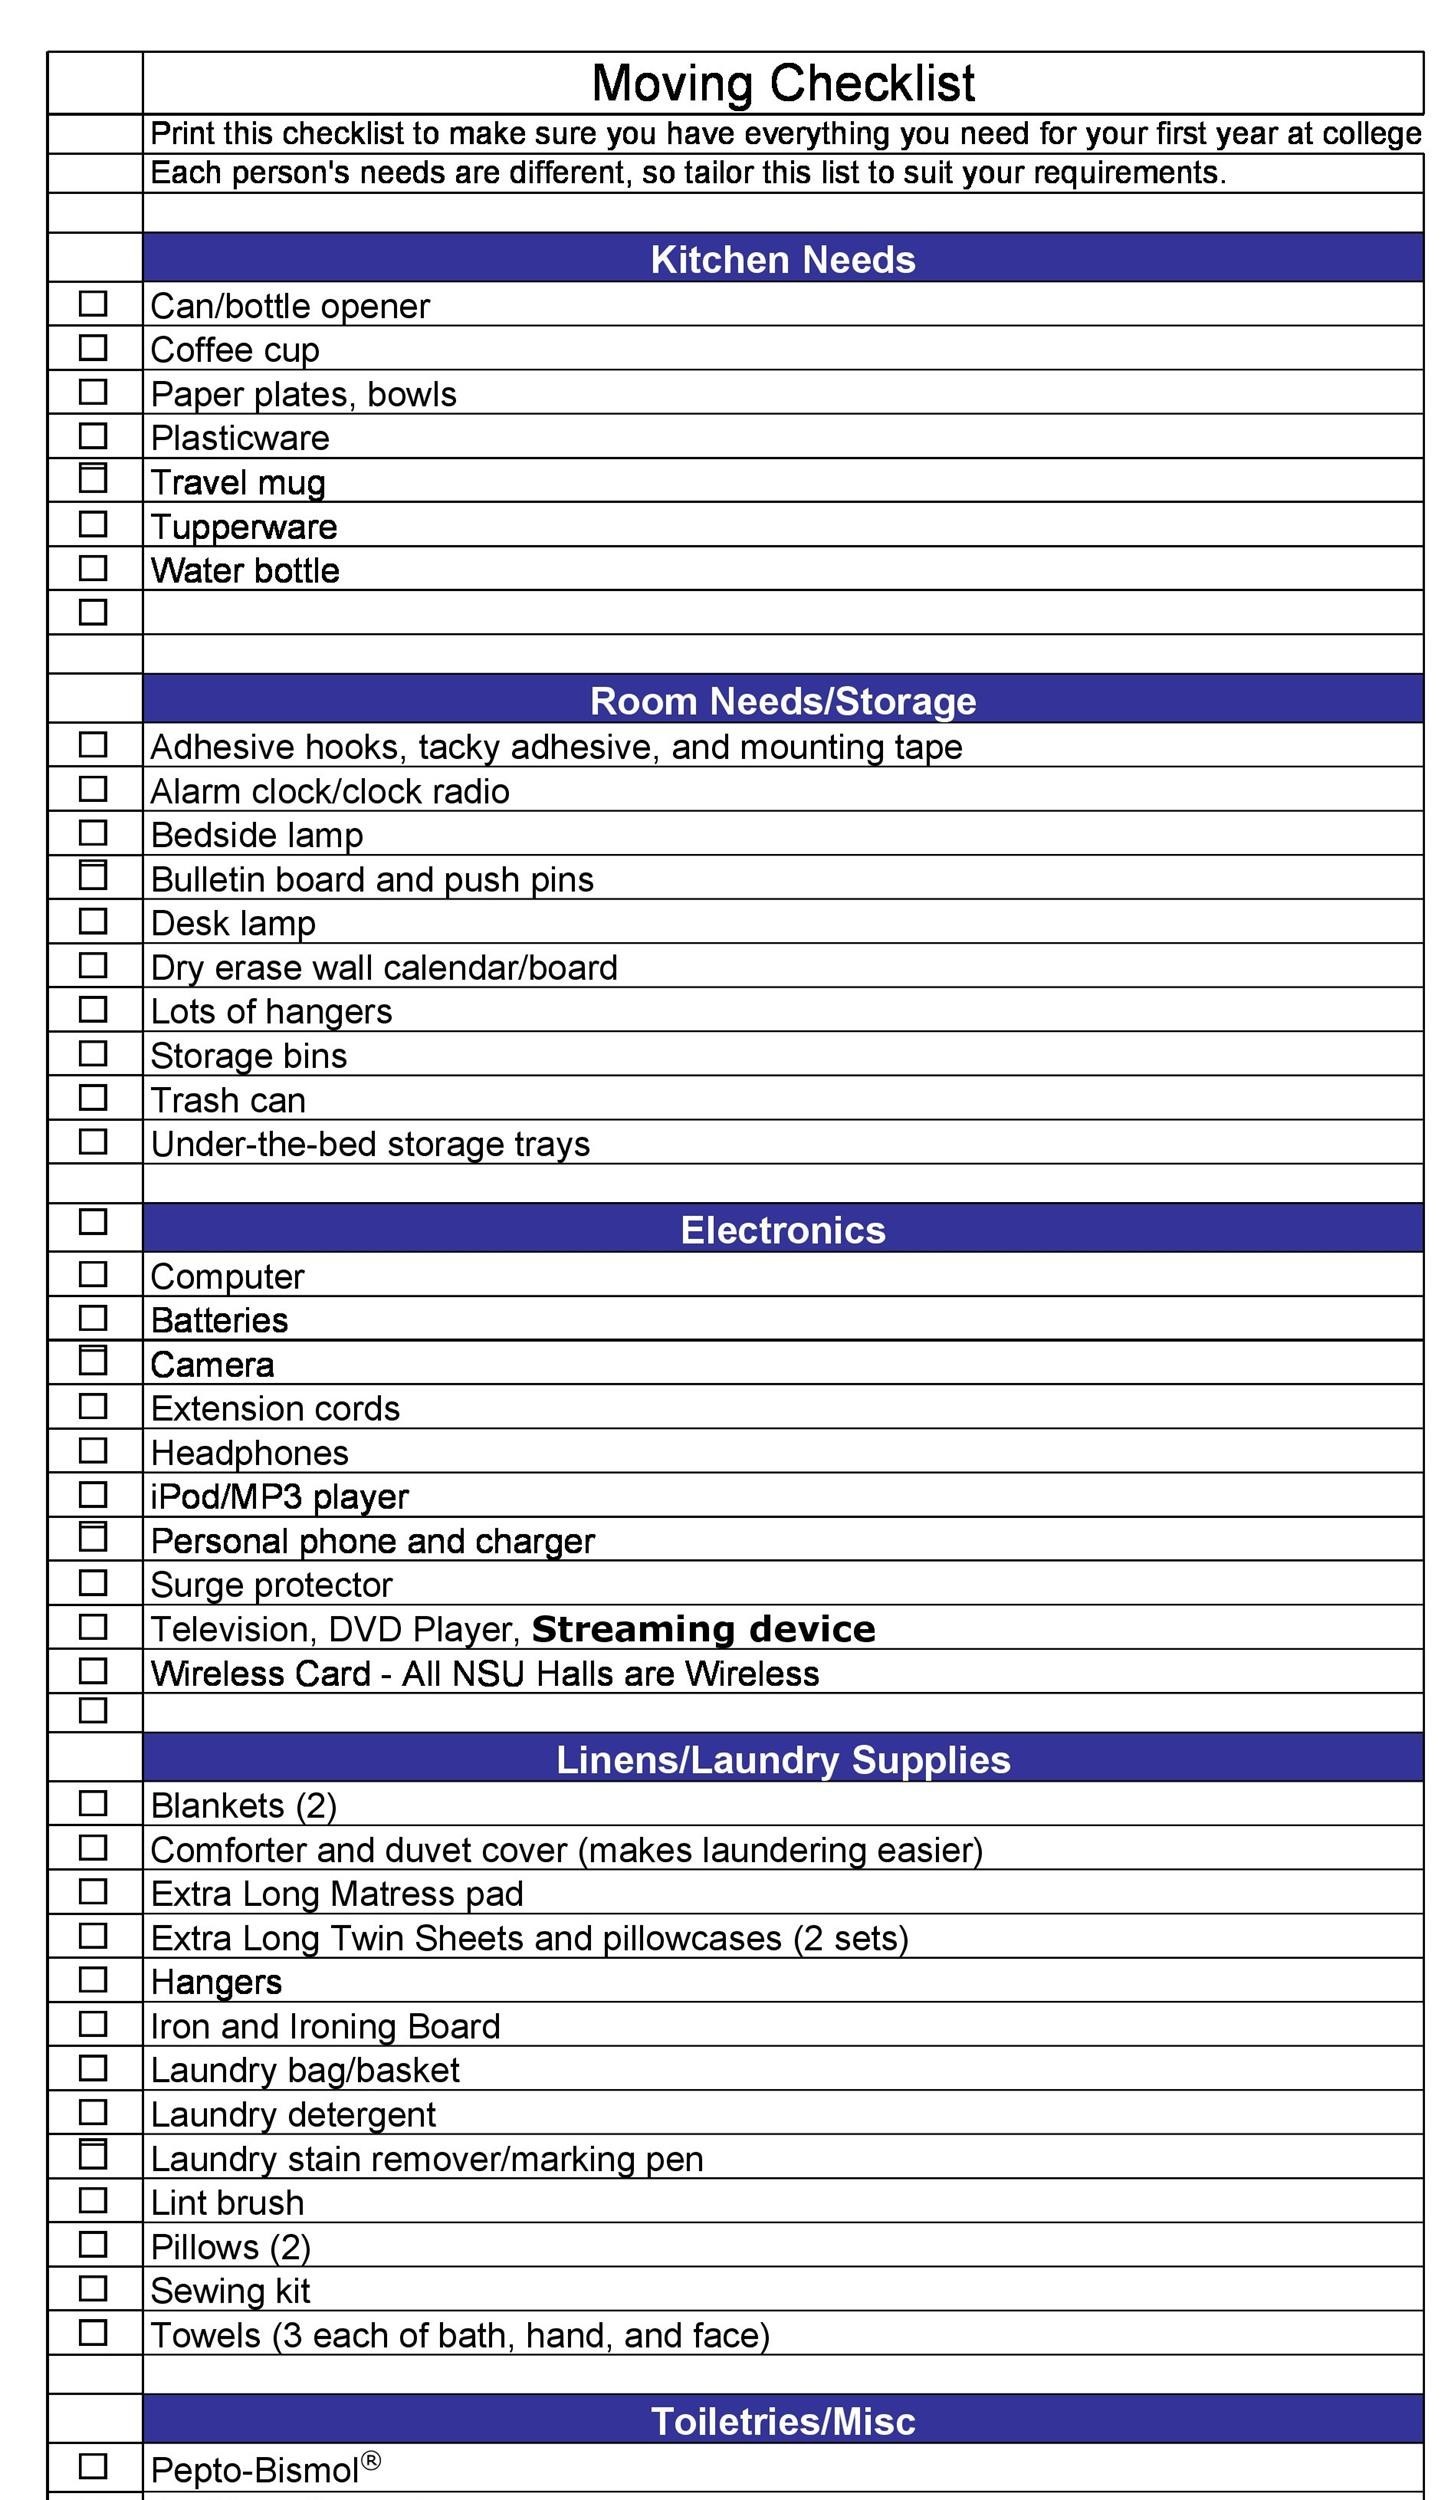 Moving Company Inventory List ~ Excel Templates